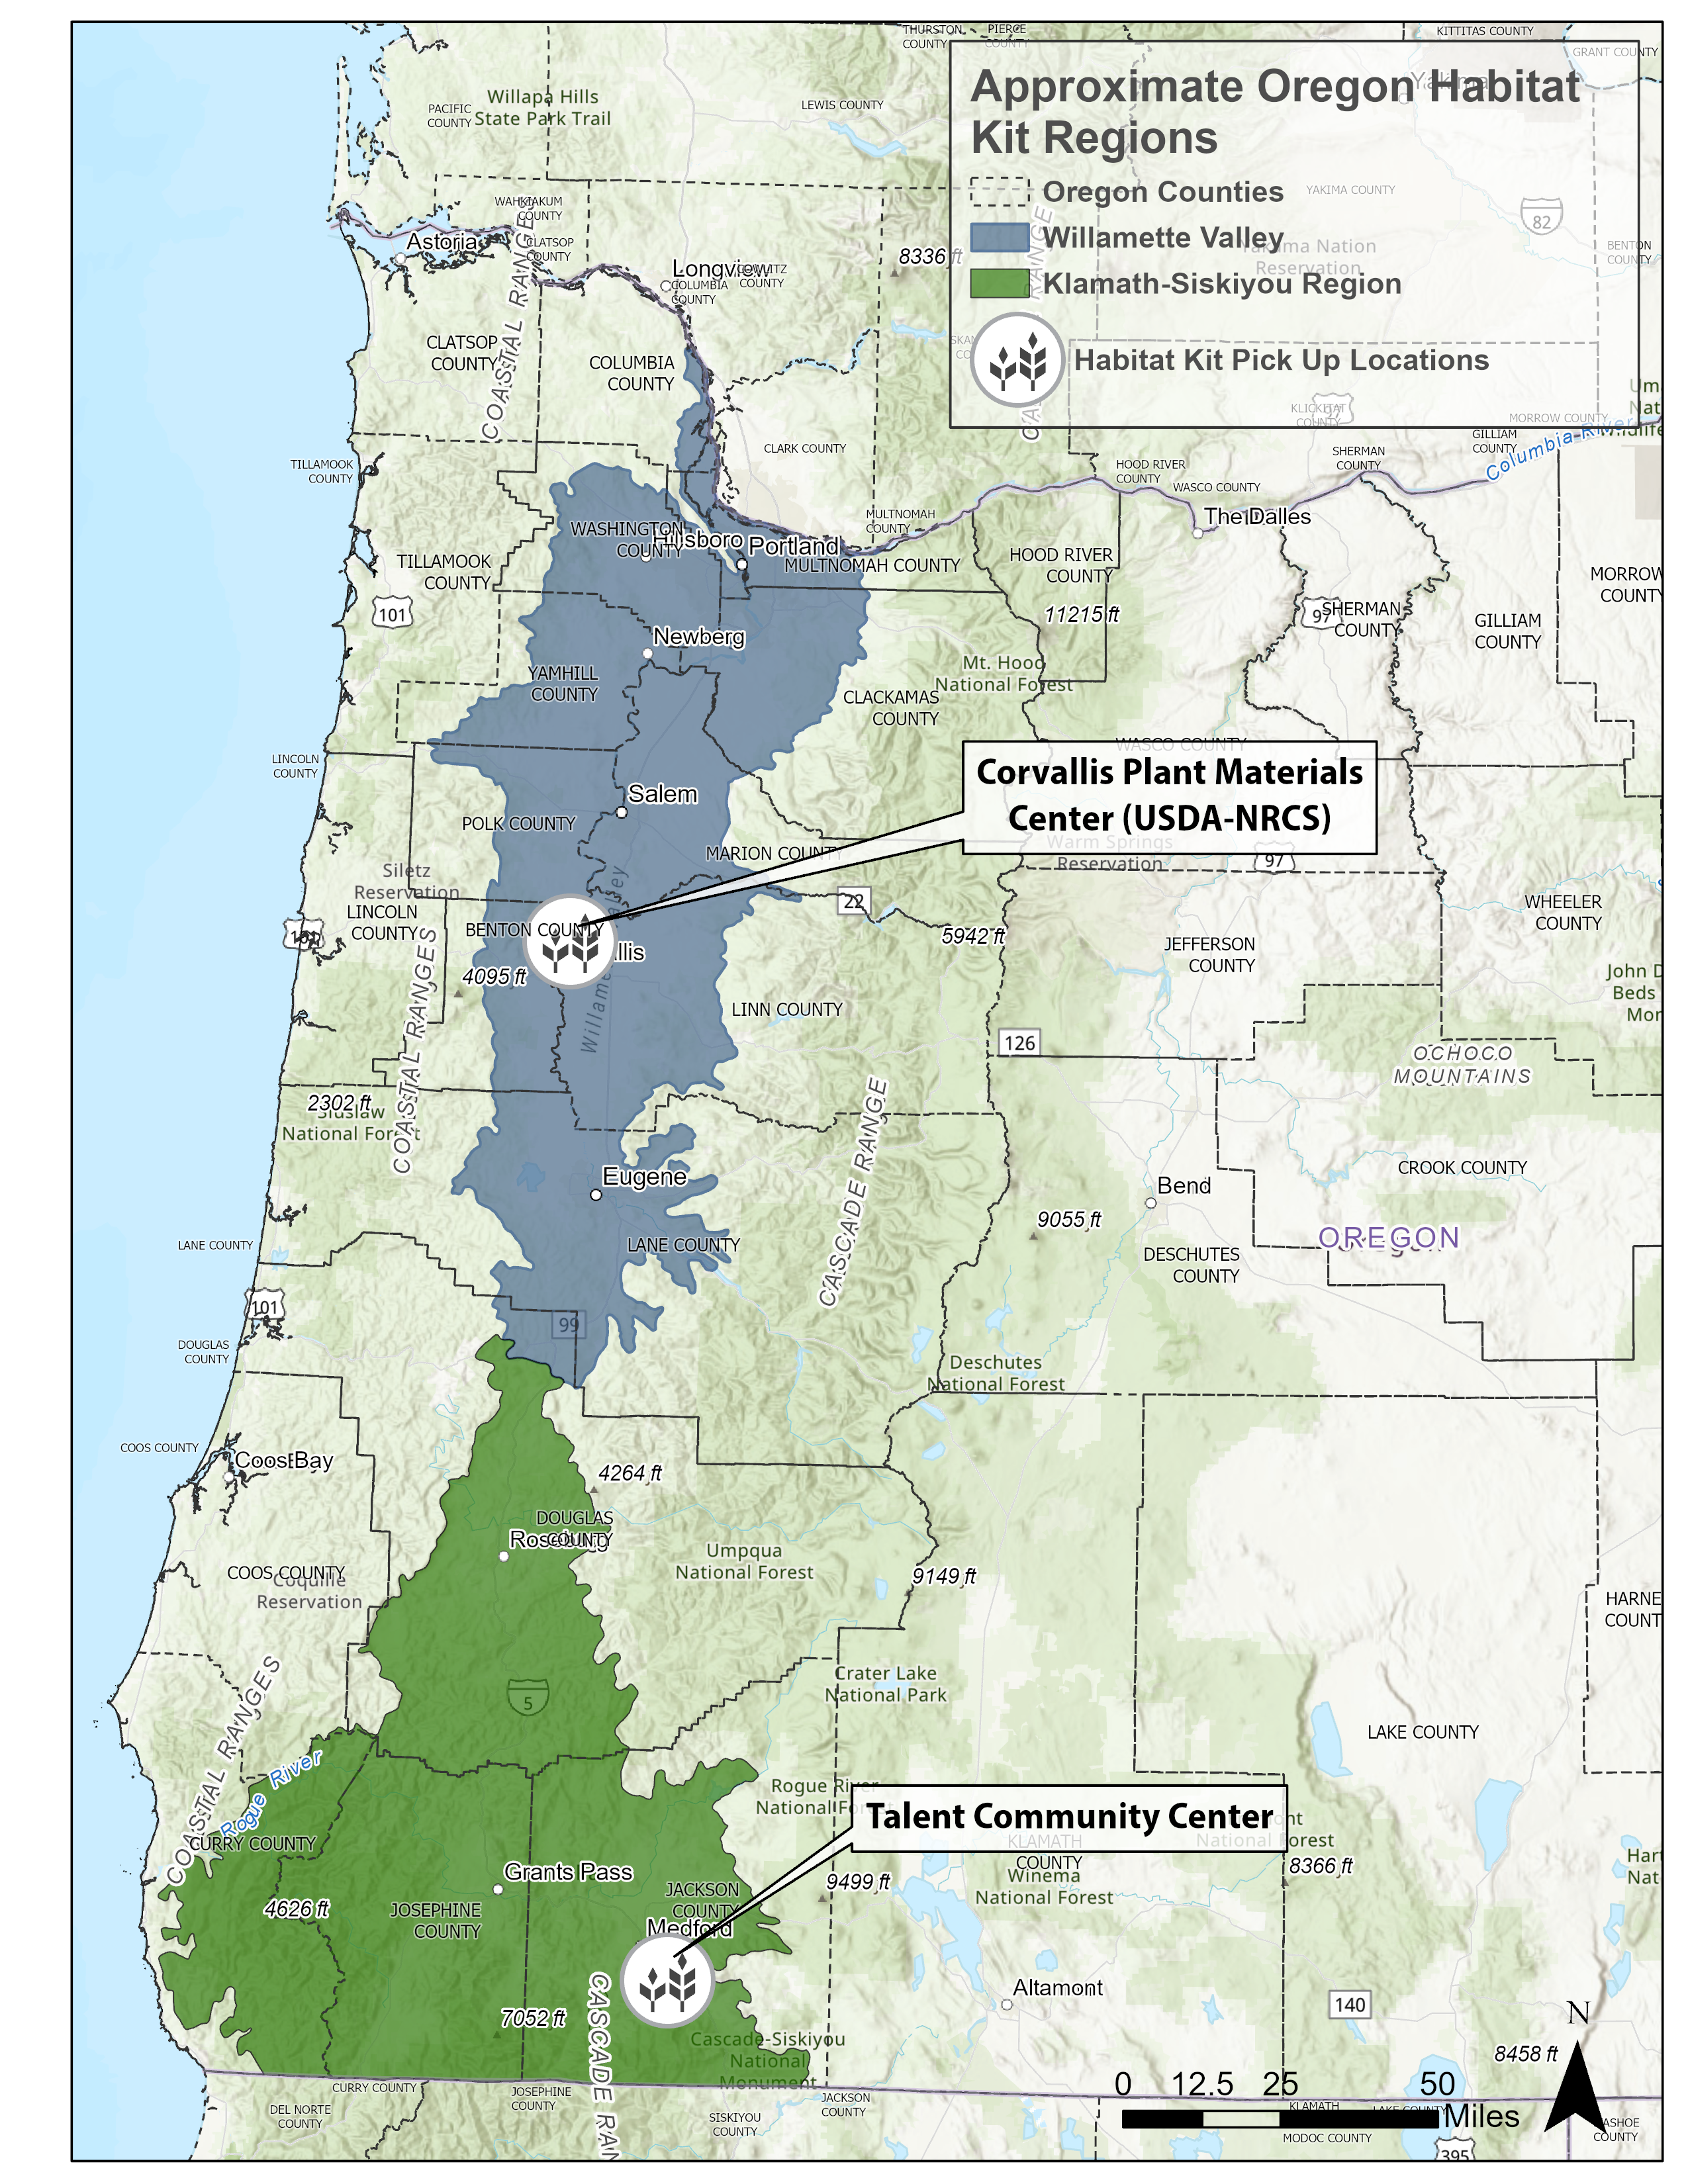 "Oregon Habitat kit regions showing the Willamette Valley and the Klamath-Siskiyou region of SW Oregon. Also shown is the Willamette Valley kit pick up location at the NRCS Plant Materials Center in Corvallis"